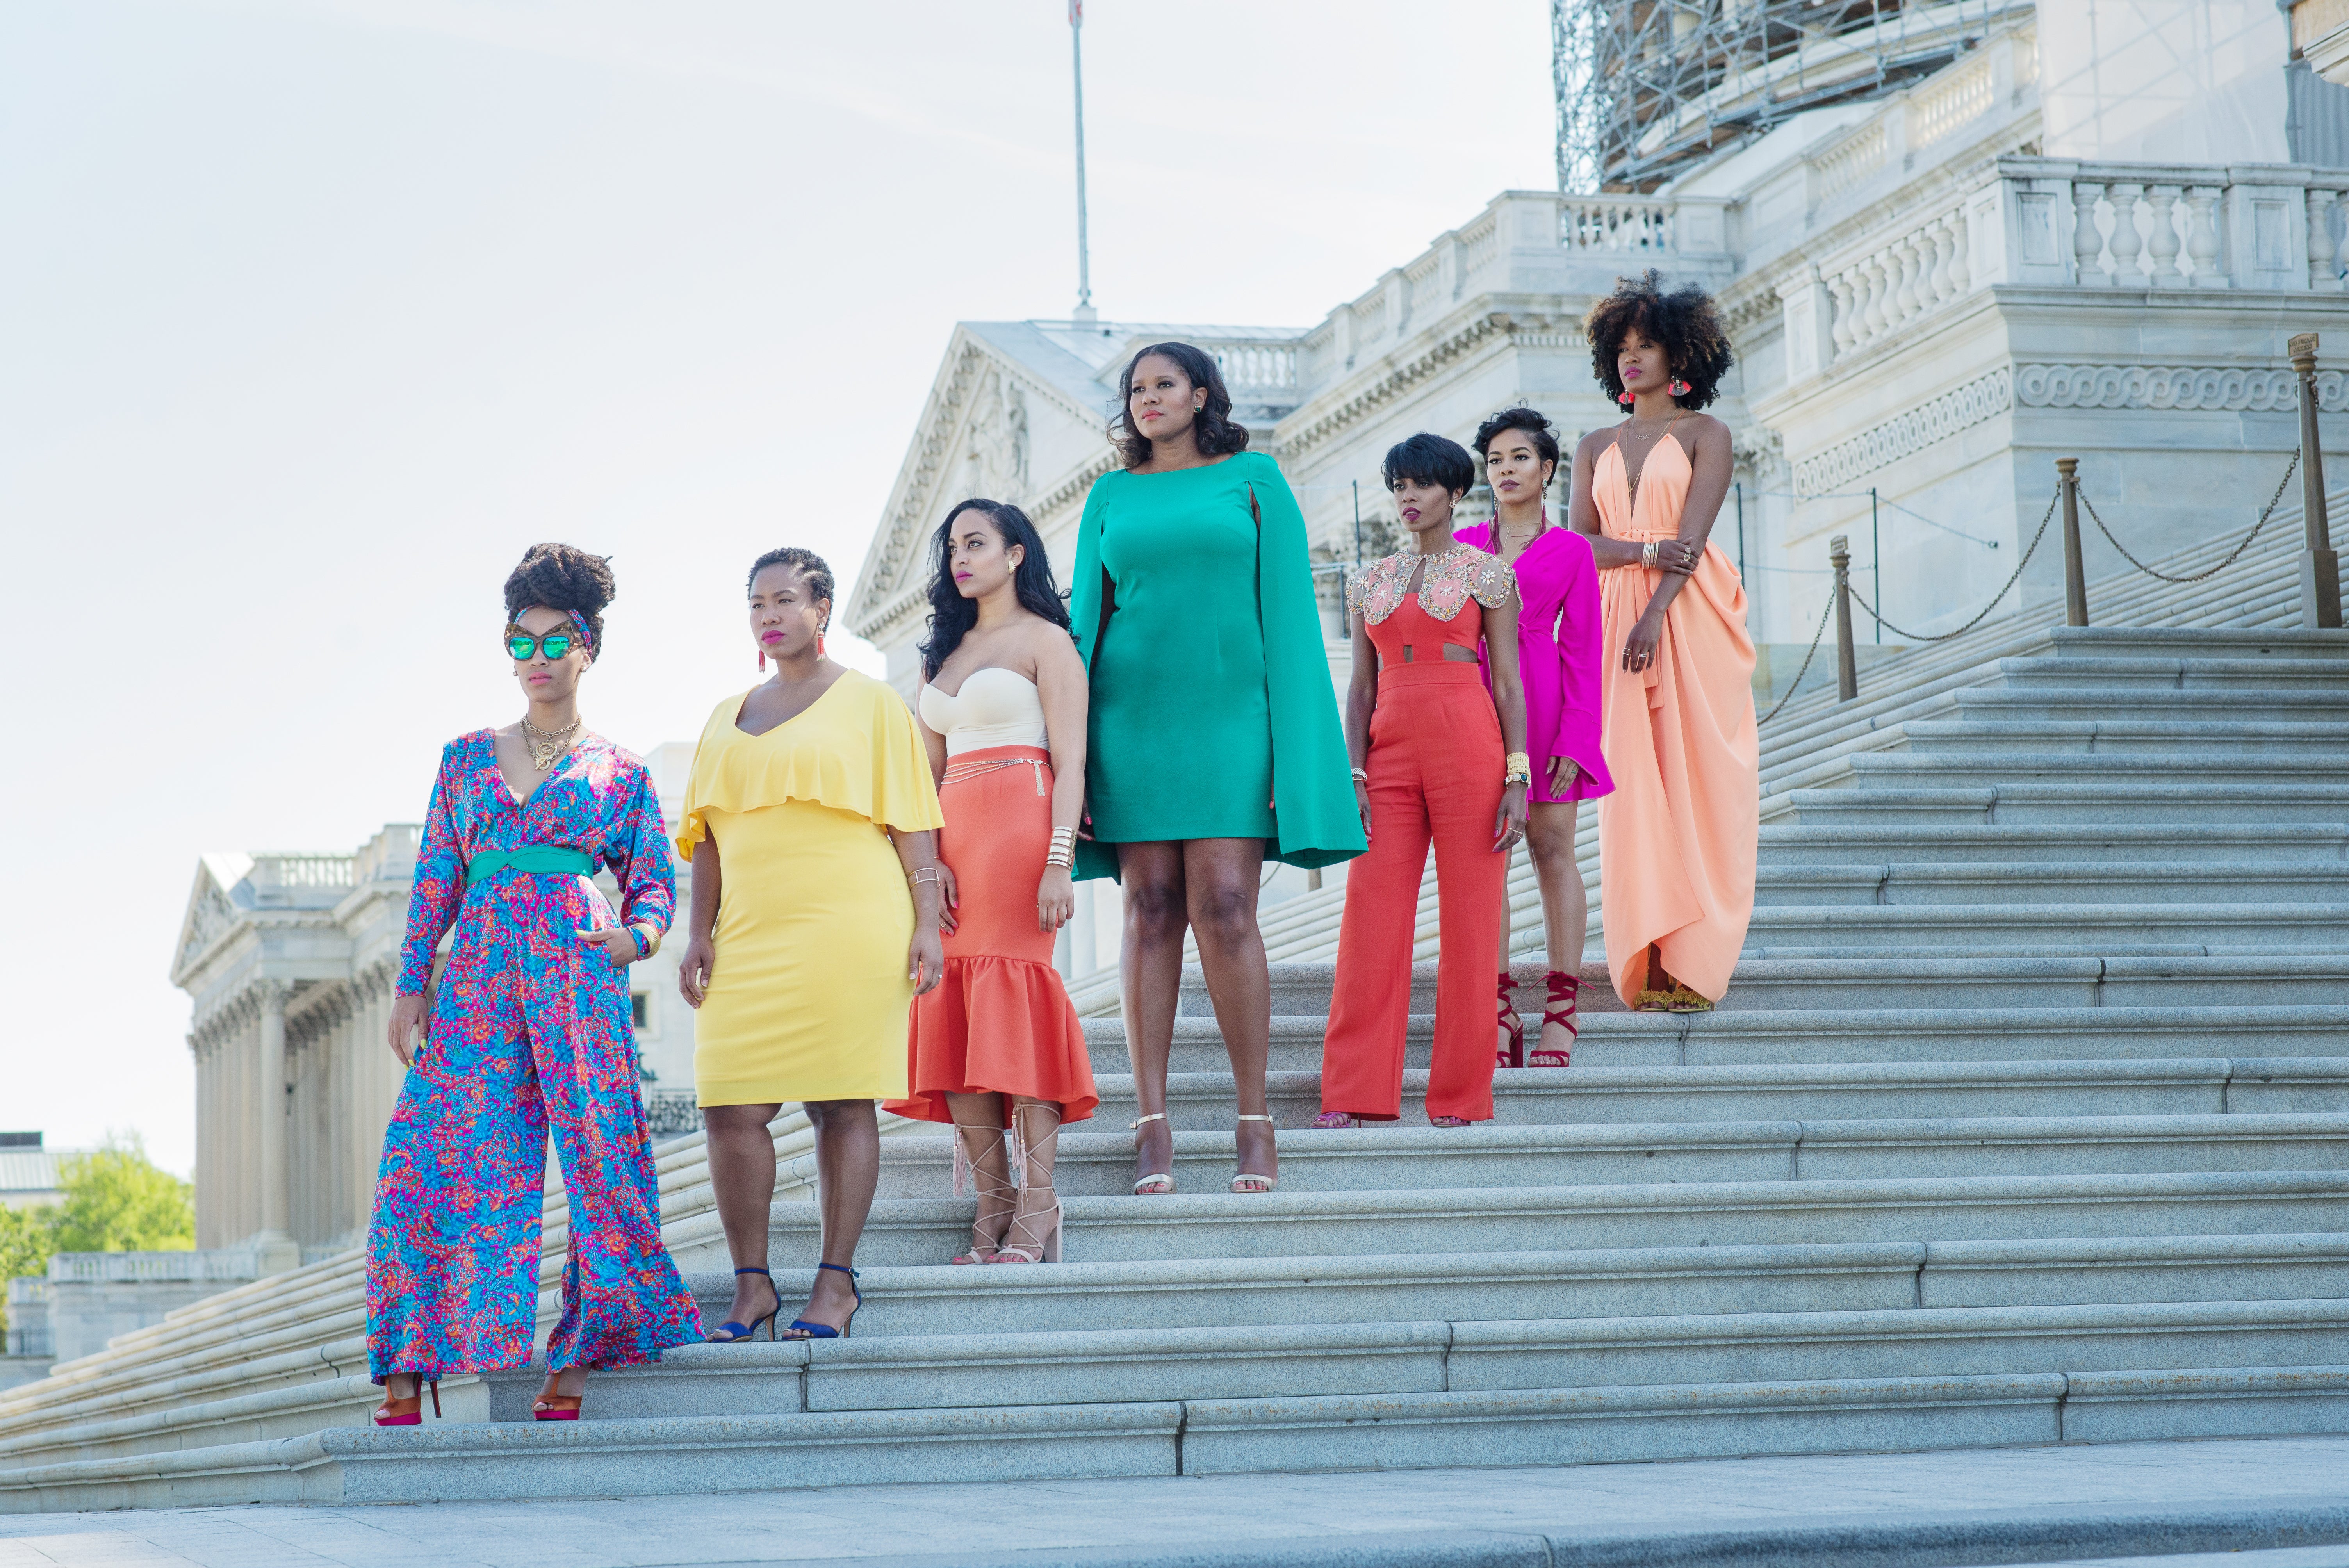 ‘The Bedazzled Crown’ Project: 7 Beautiful Black Women Explain Why They Are Queens